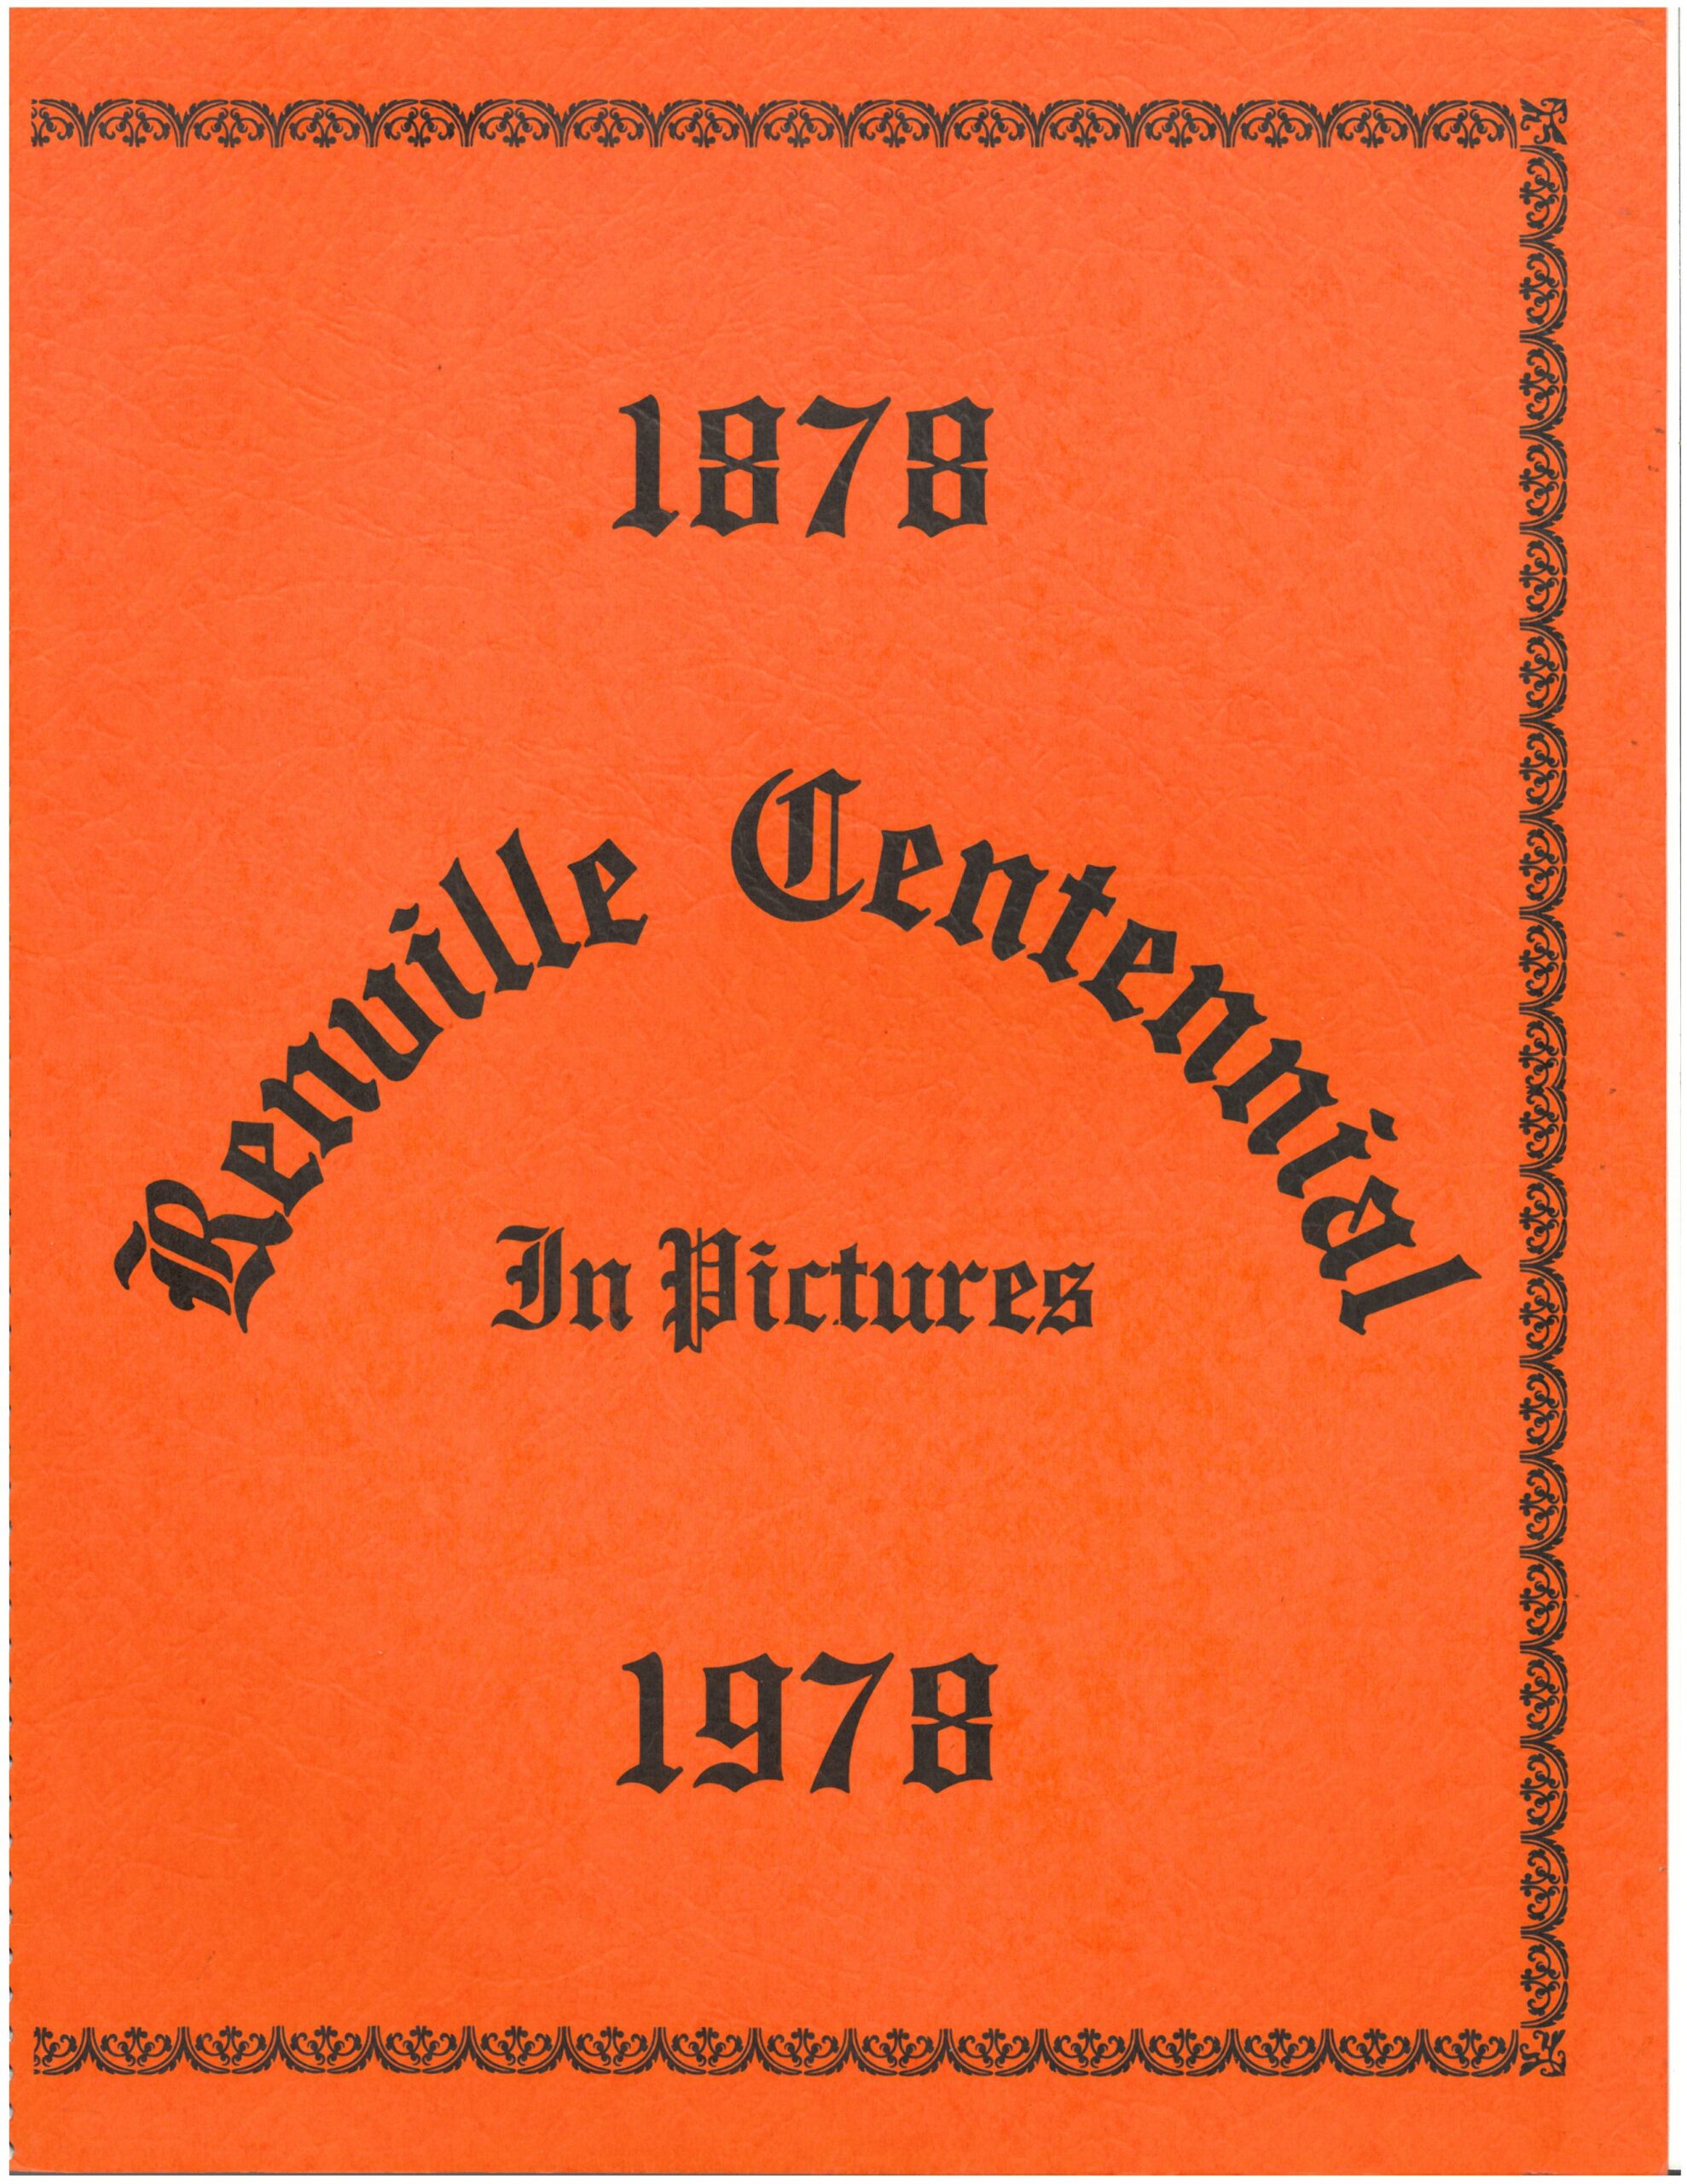 Renville Centennial in Pictures 1978 Renville County Historical